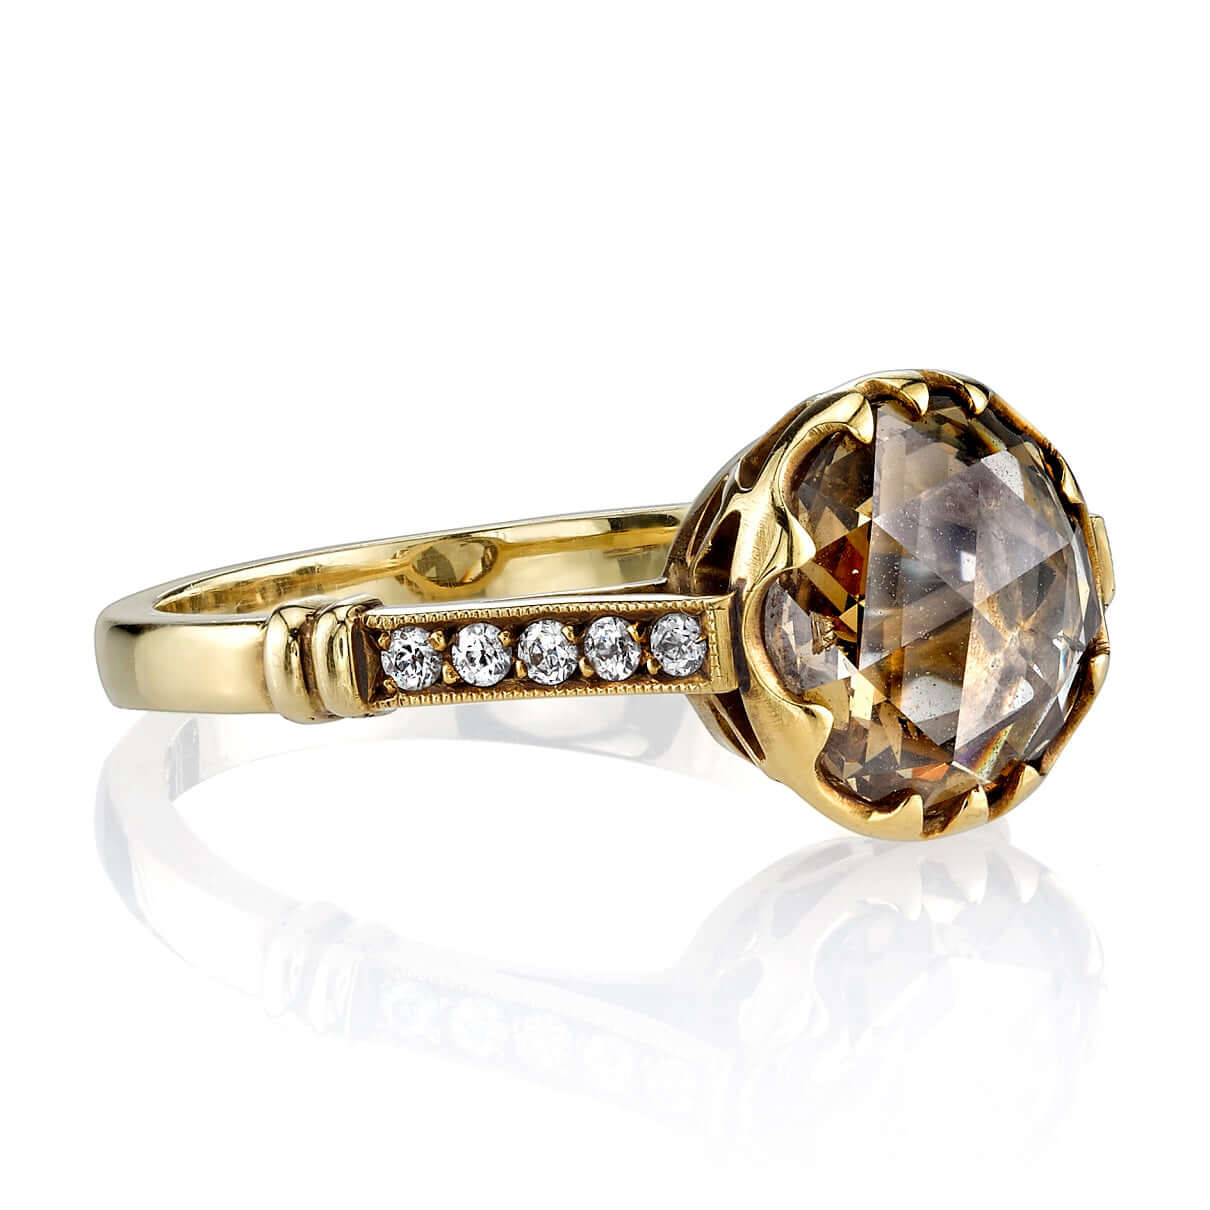 SINGLE STONE SKYLER RING featuring 1.62ct Peach-Brown/SI rose cut diamond with 0.12ctw old European cut accent diamond set in a handcrafted oxidized 18K yellow gold mounting.